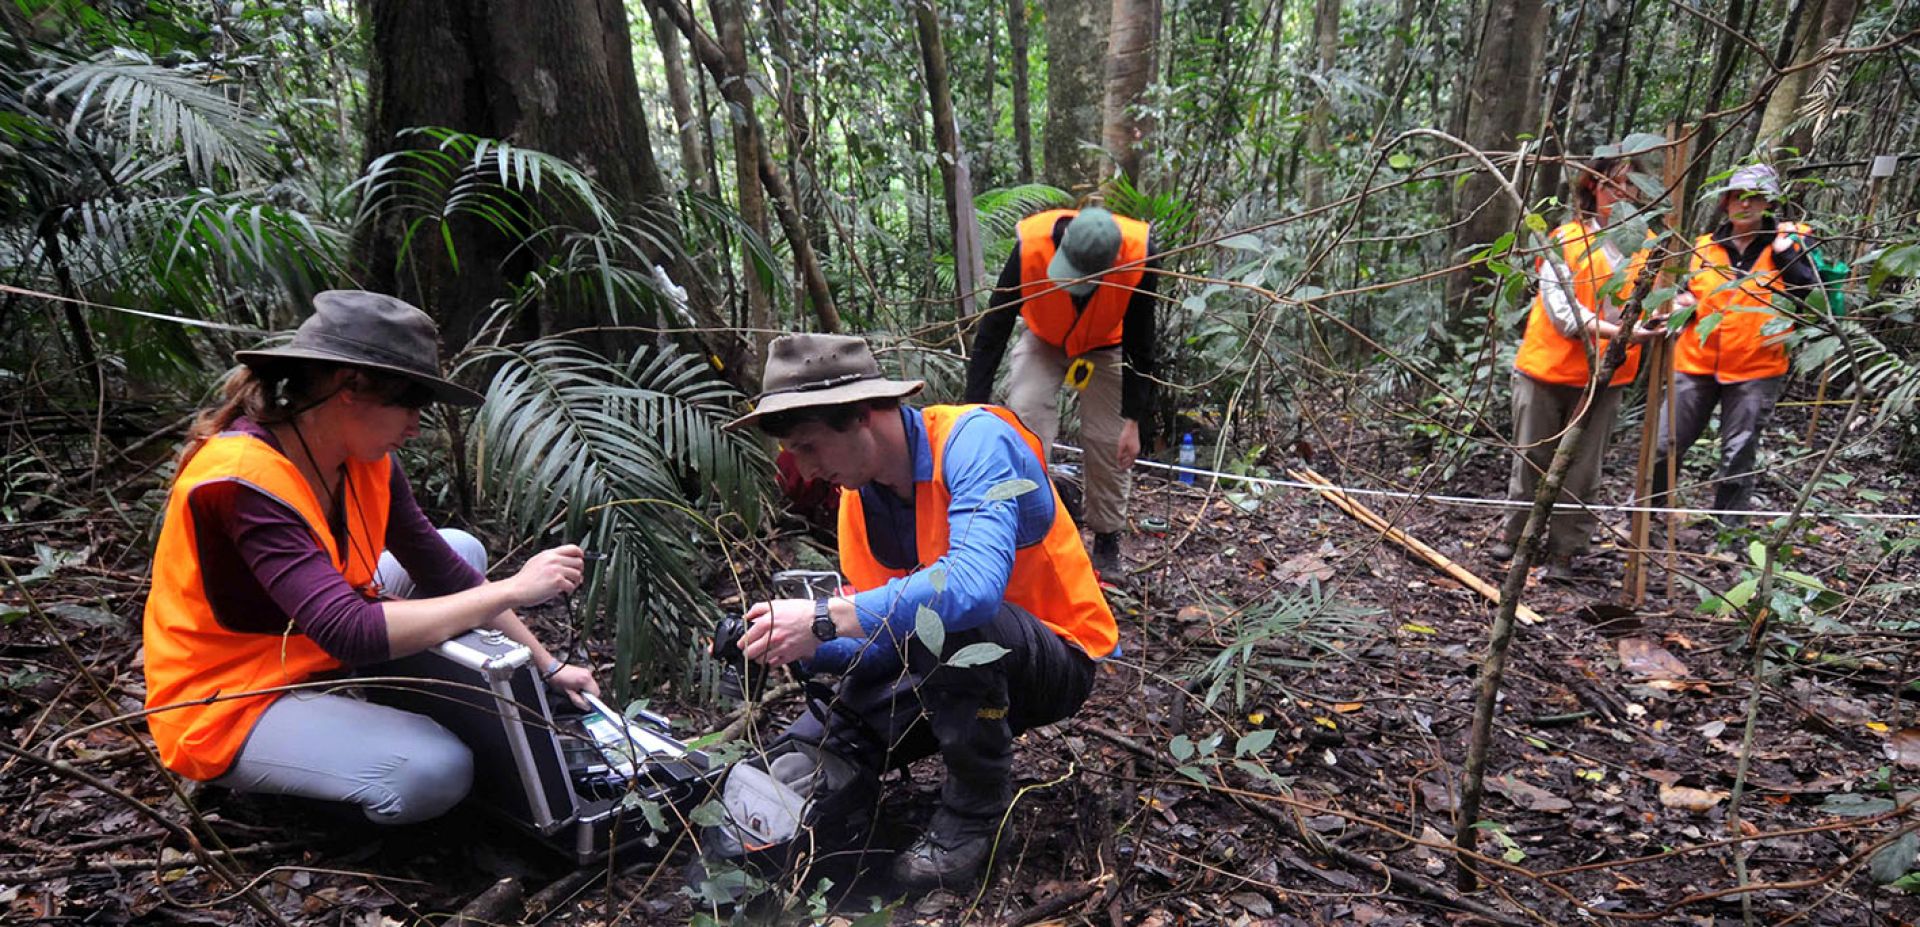 Researchers in orange vests setting up monitoring equipment in the under-storey of tropical rainforest